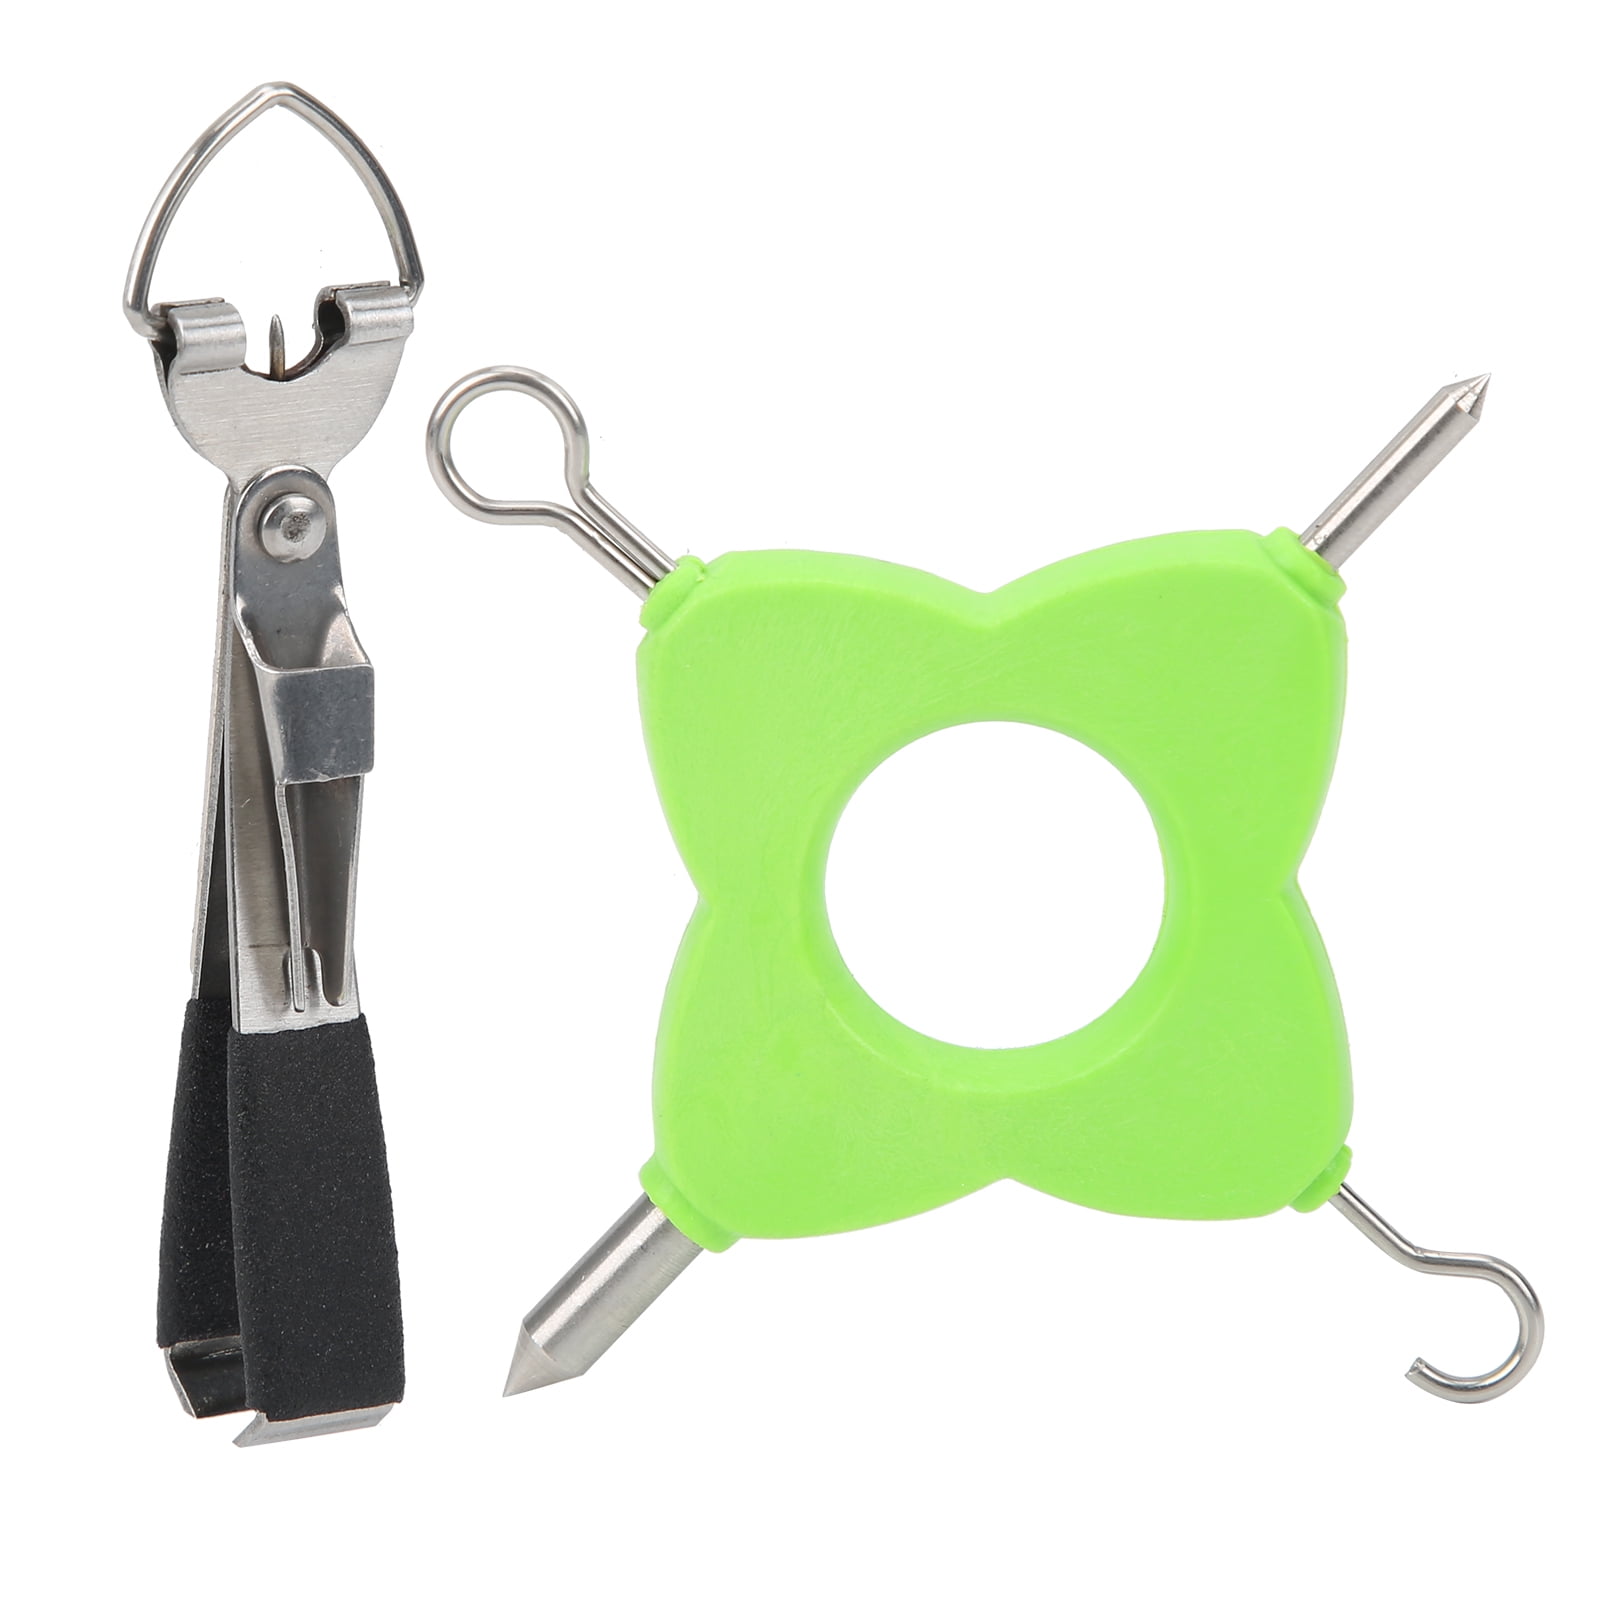 Details about   Fishhook Knot Puller Fishing Kotting Tools Stainless Steel Fishing Accs 4‑in‑1 